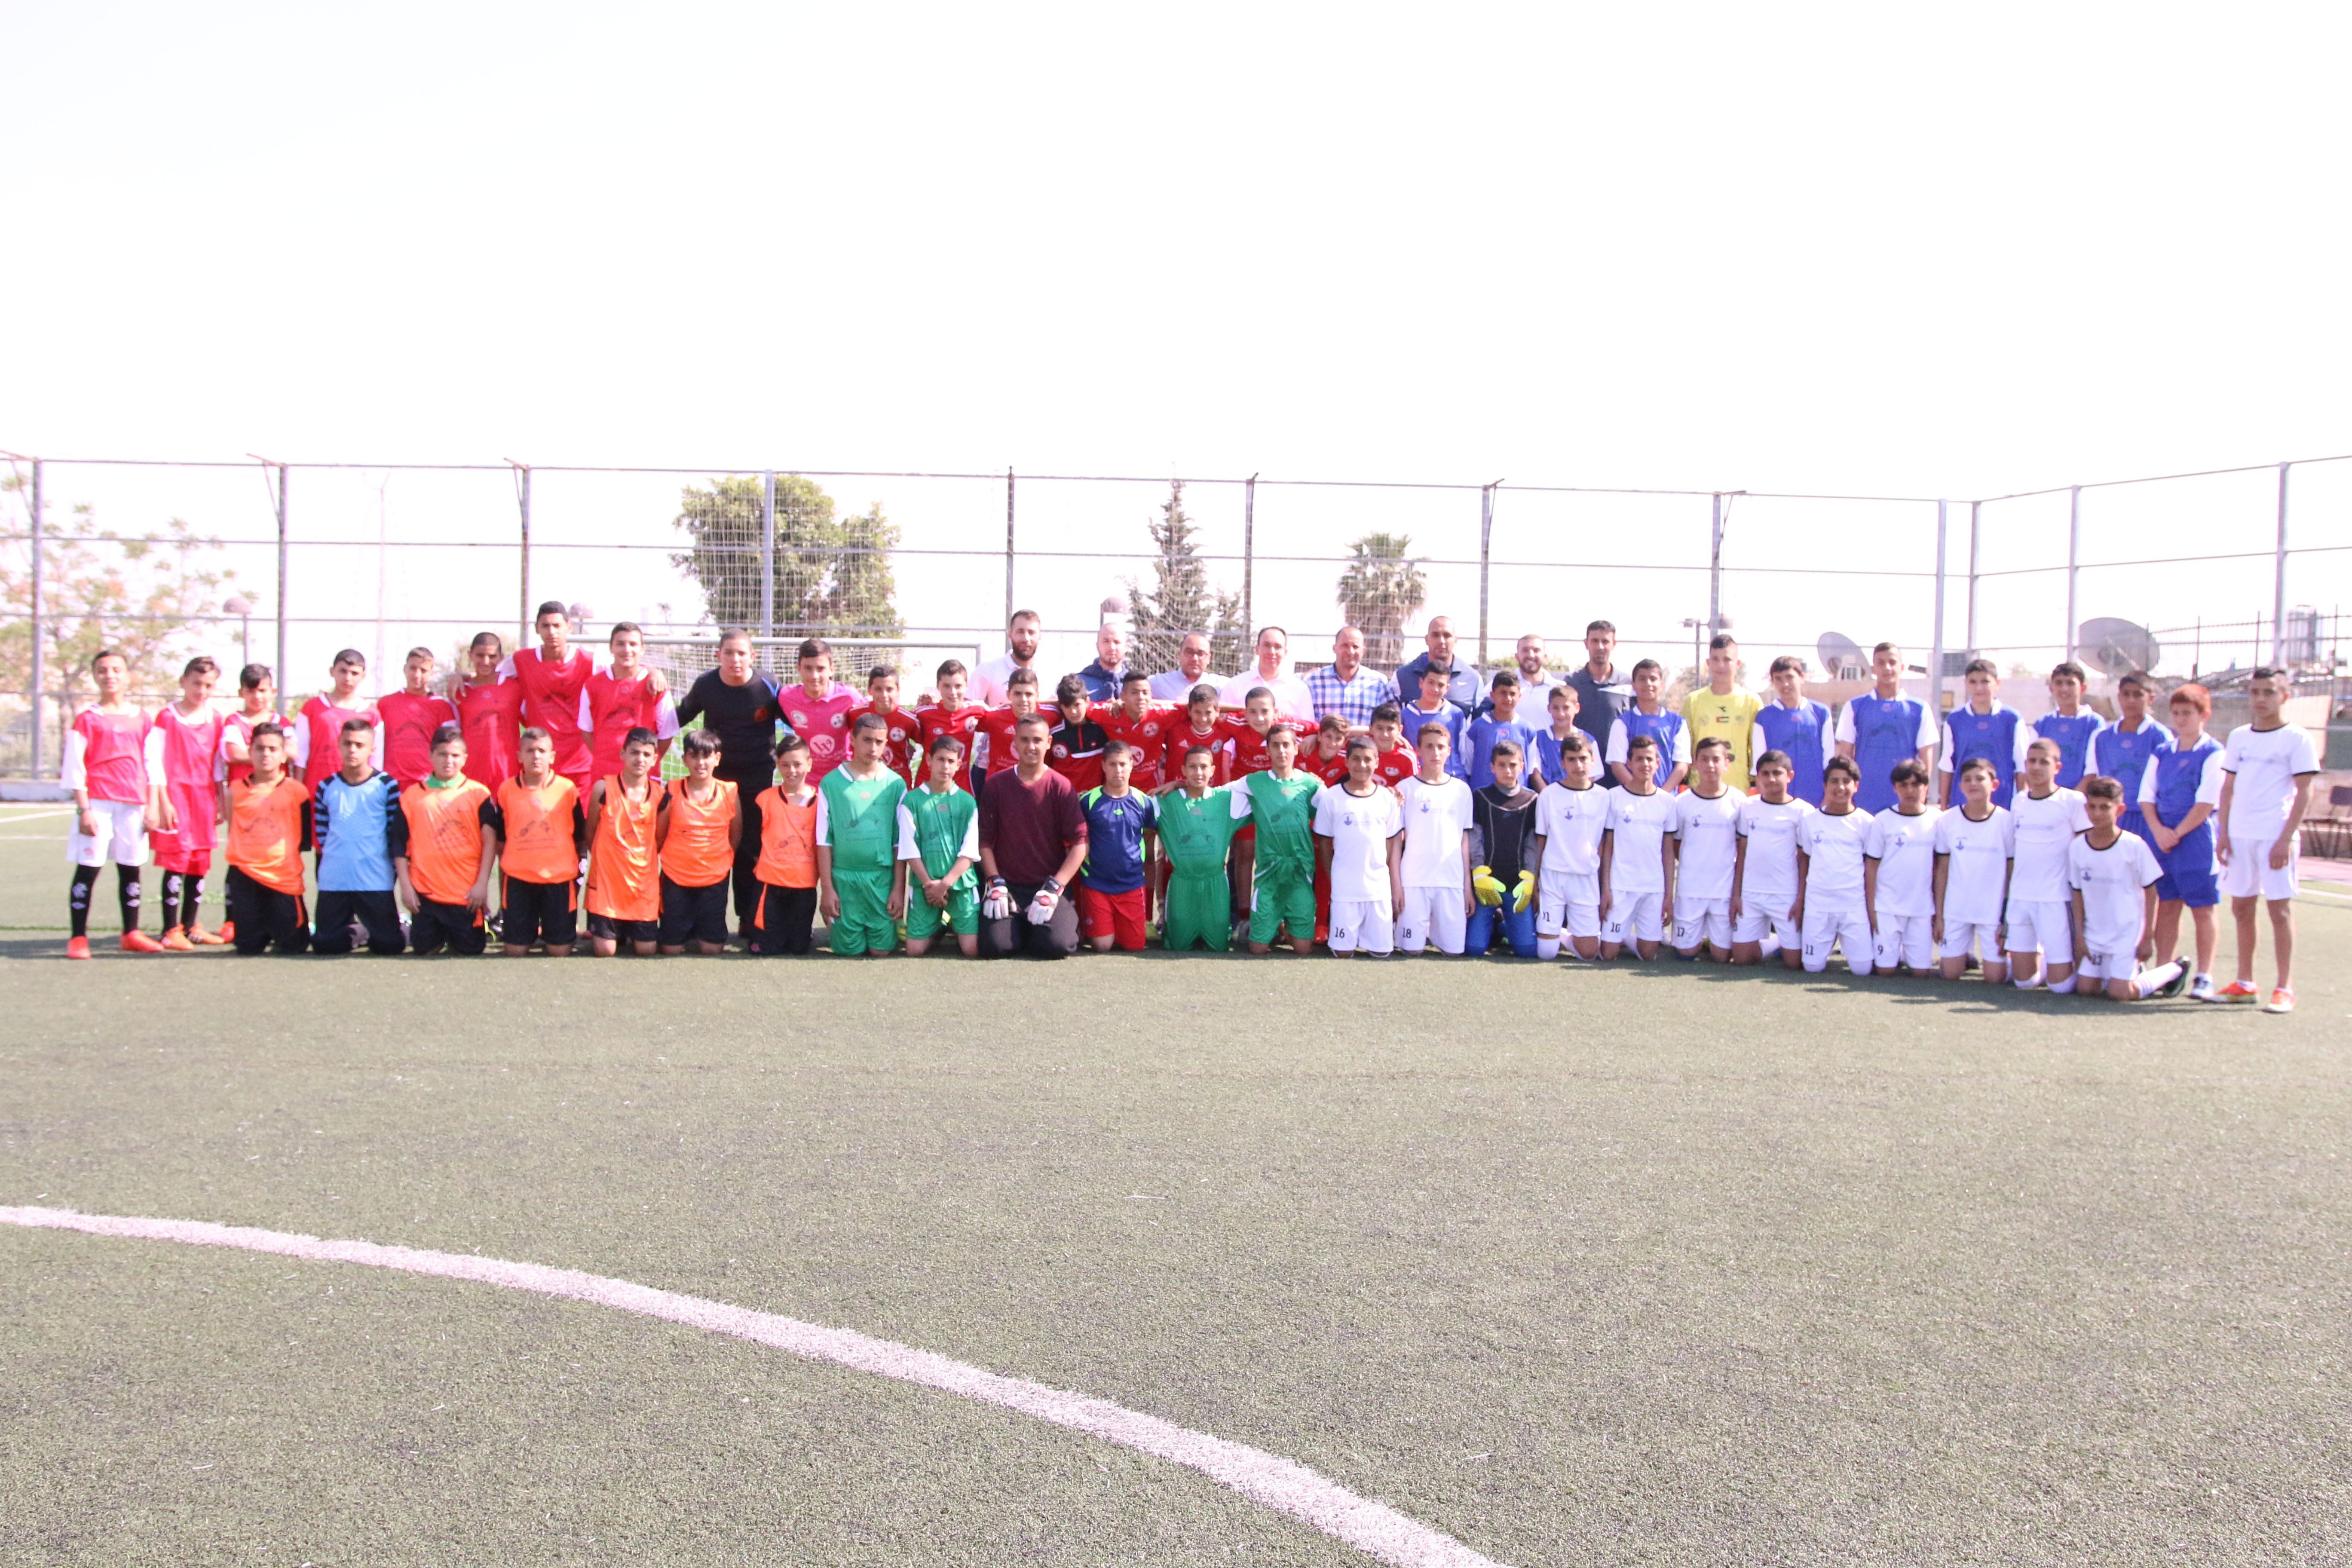 Mount of Olives football club wins the tournament ‘Jerusalemite Prisoner’s Day’, Burj Al-Luqluq comes in the second place and Palestinian academy for footballers comes thirdly